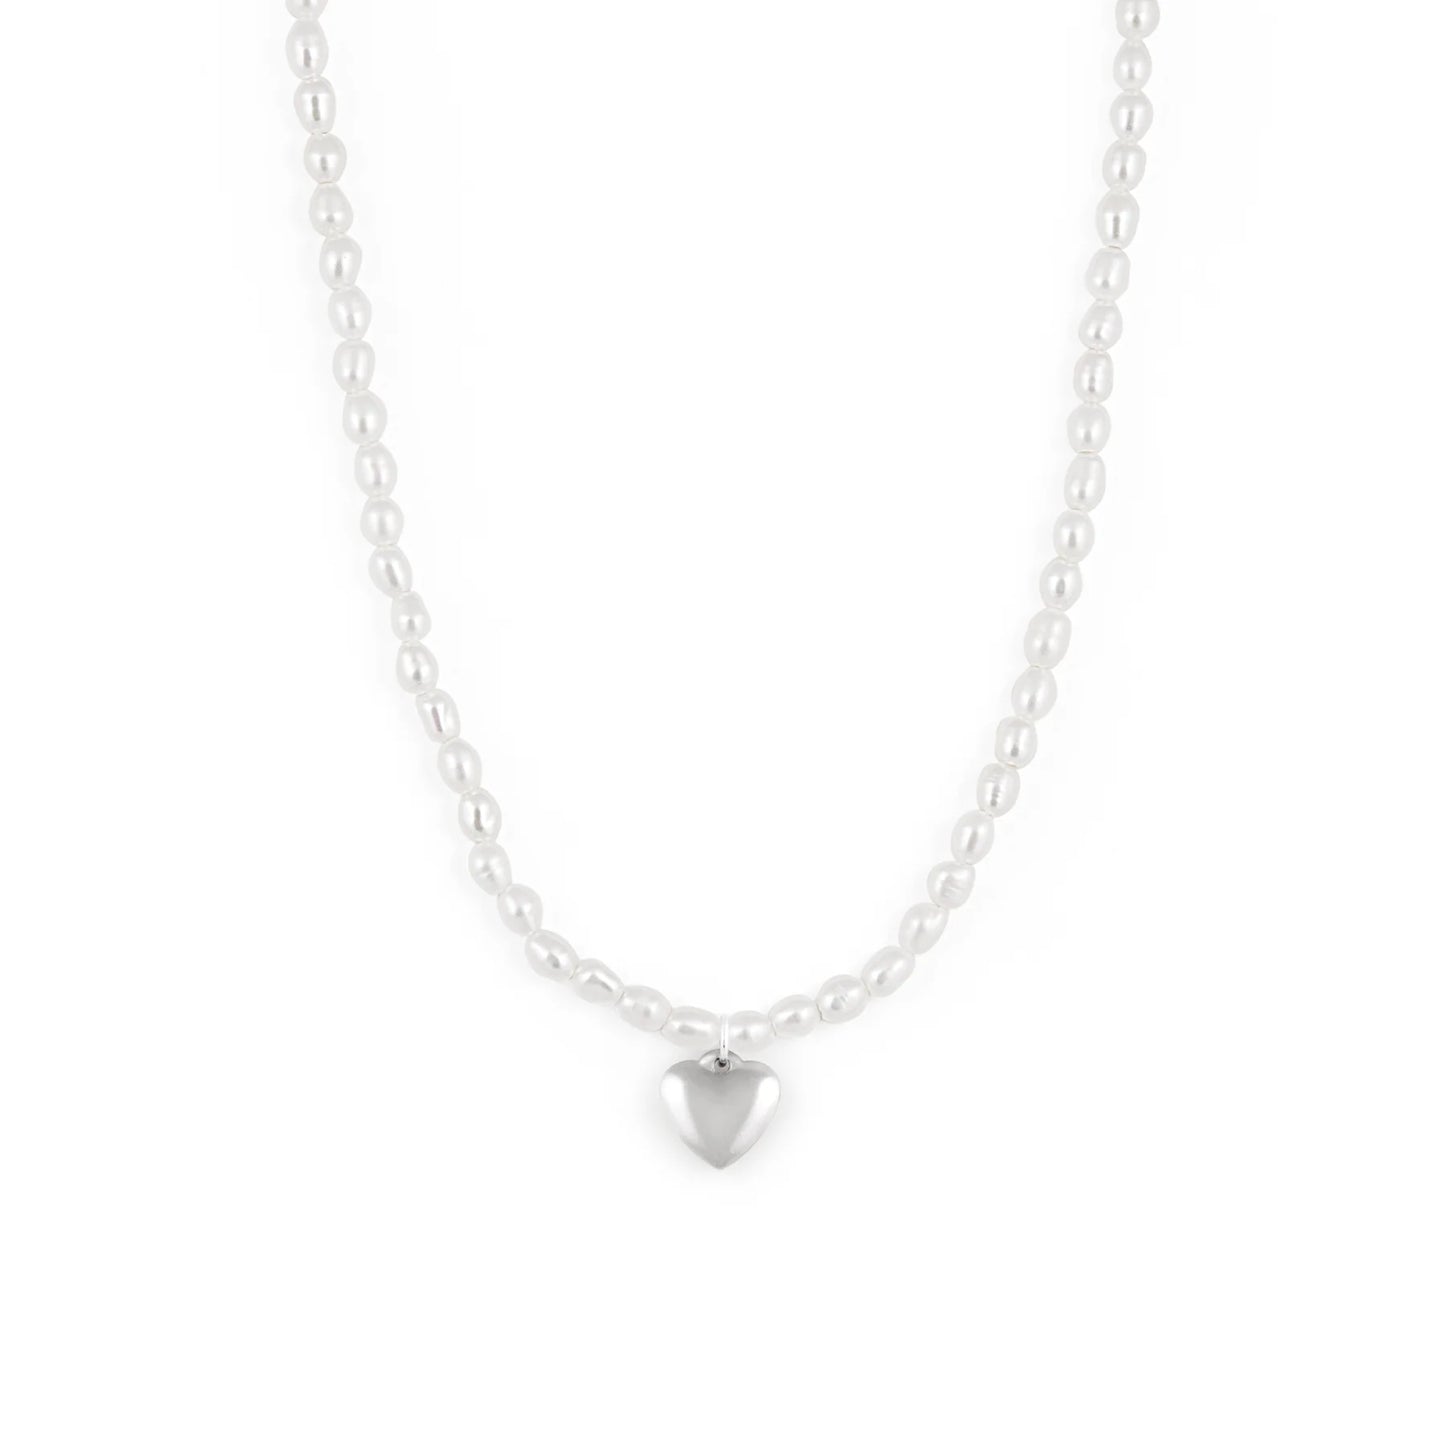 DREAM pearl necklace - stainless steel